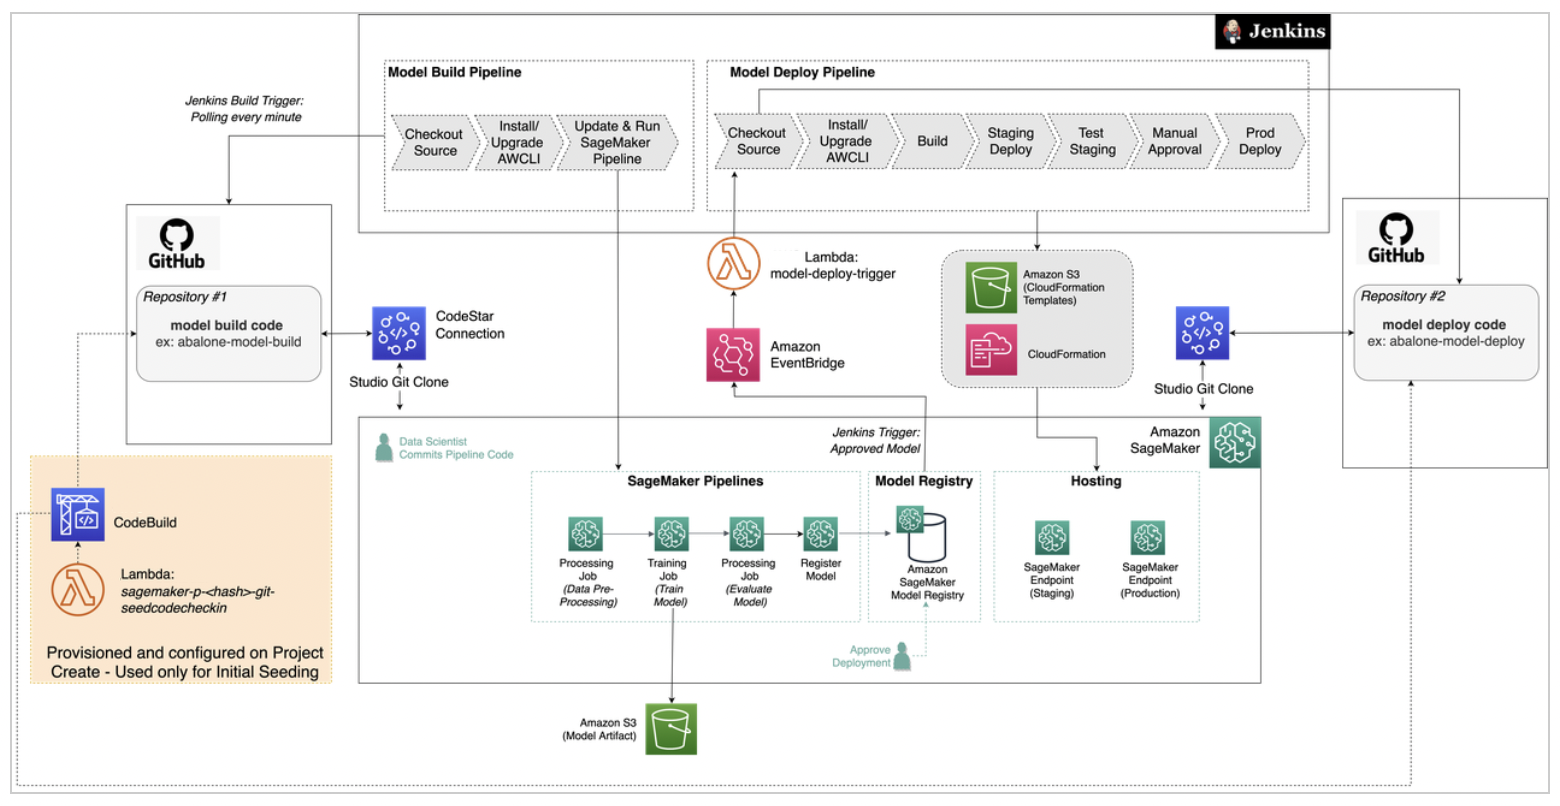 The workflow of the pipeline built using the project template for model building, training, and deployment with third-party Git repositories using Jenkins.